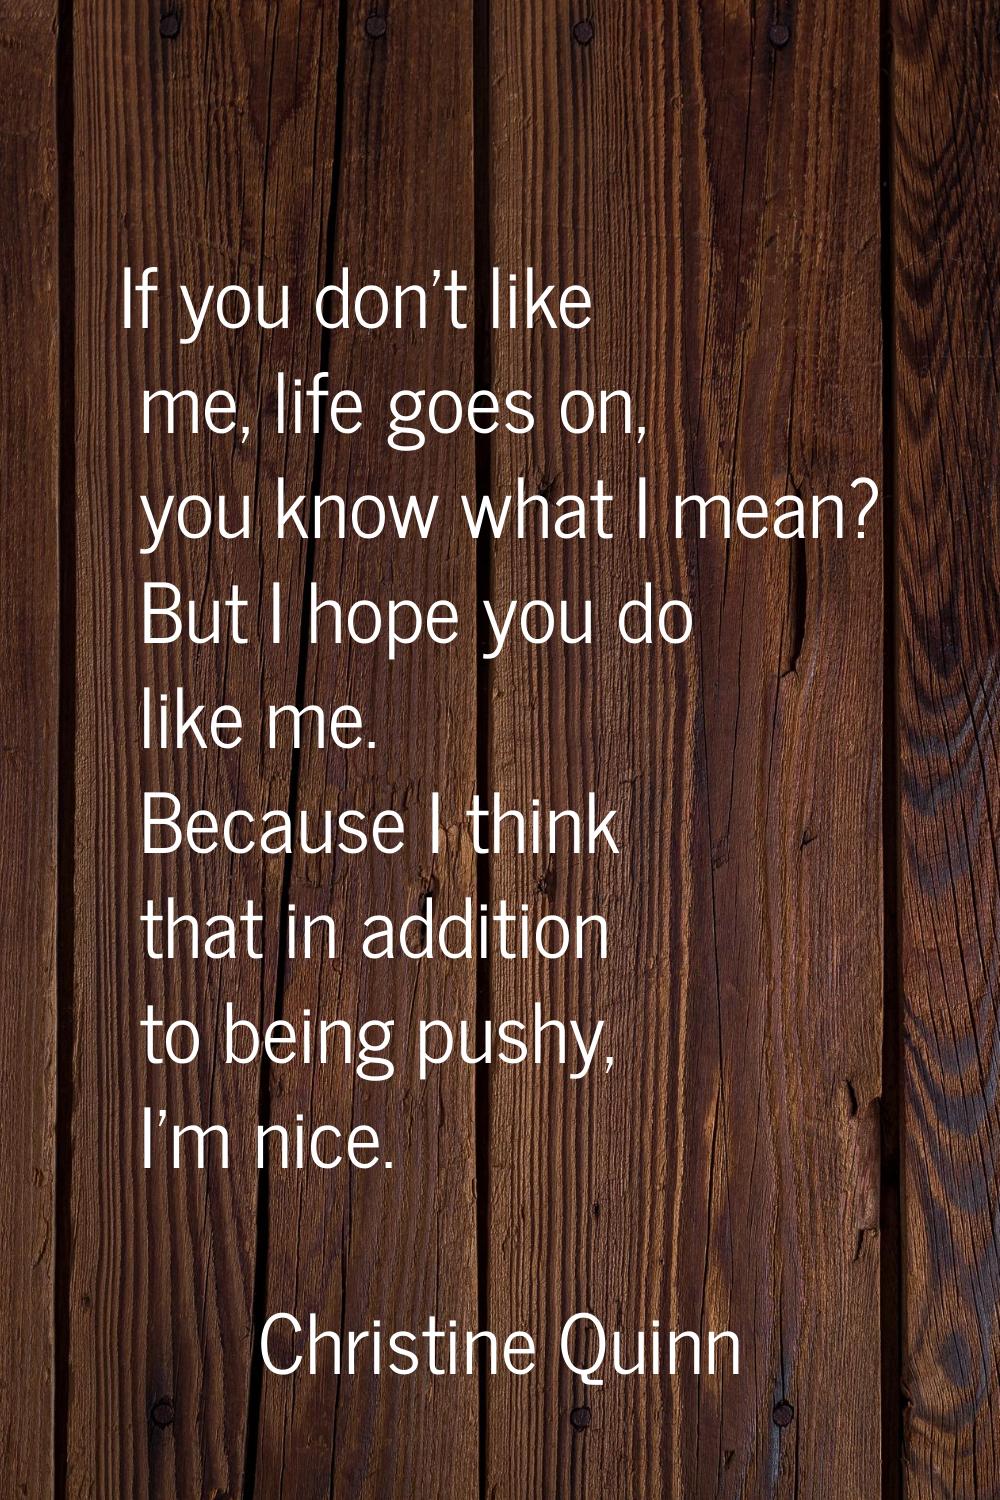 If you don't like me, life goes on, you know what I mean? But I hope you do like me. Because I thin